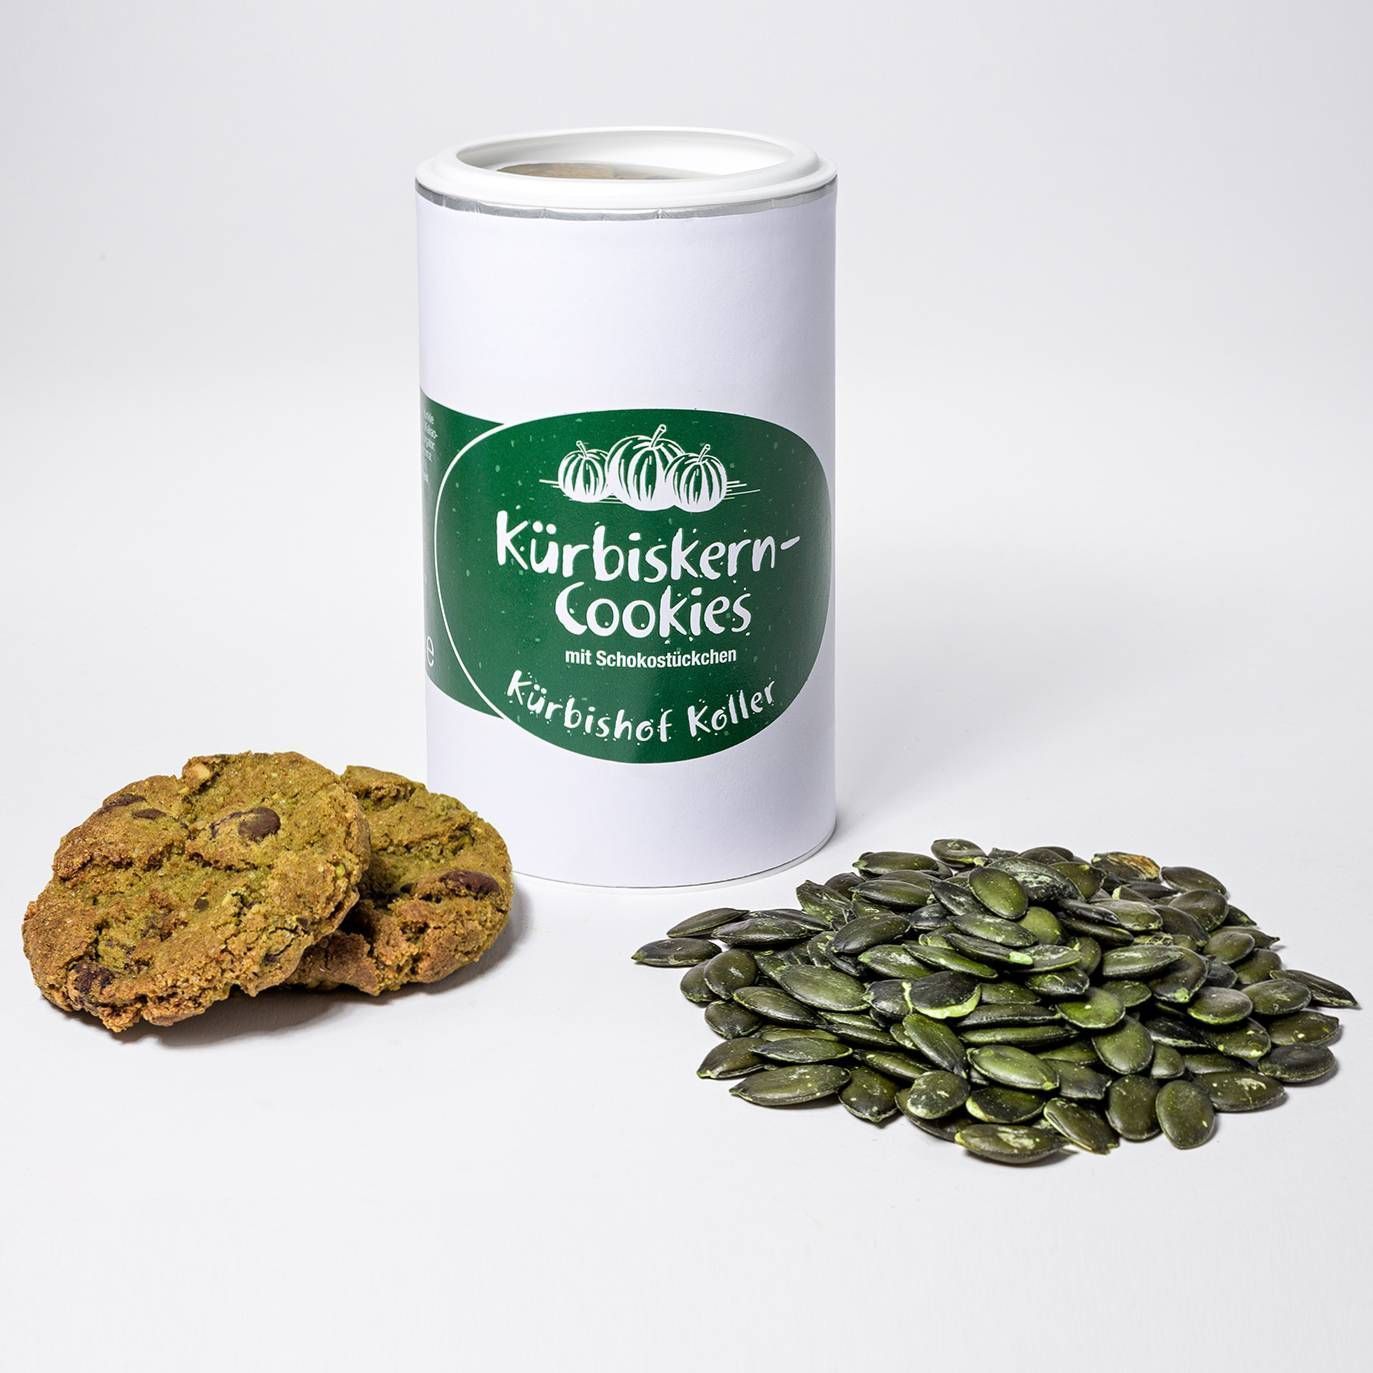 Pumpkin Seed Cookies with Chocolate Chips in Finland